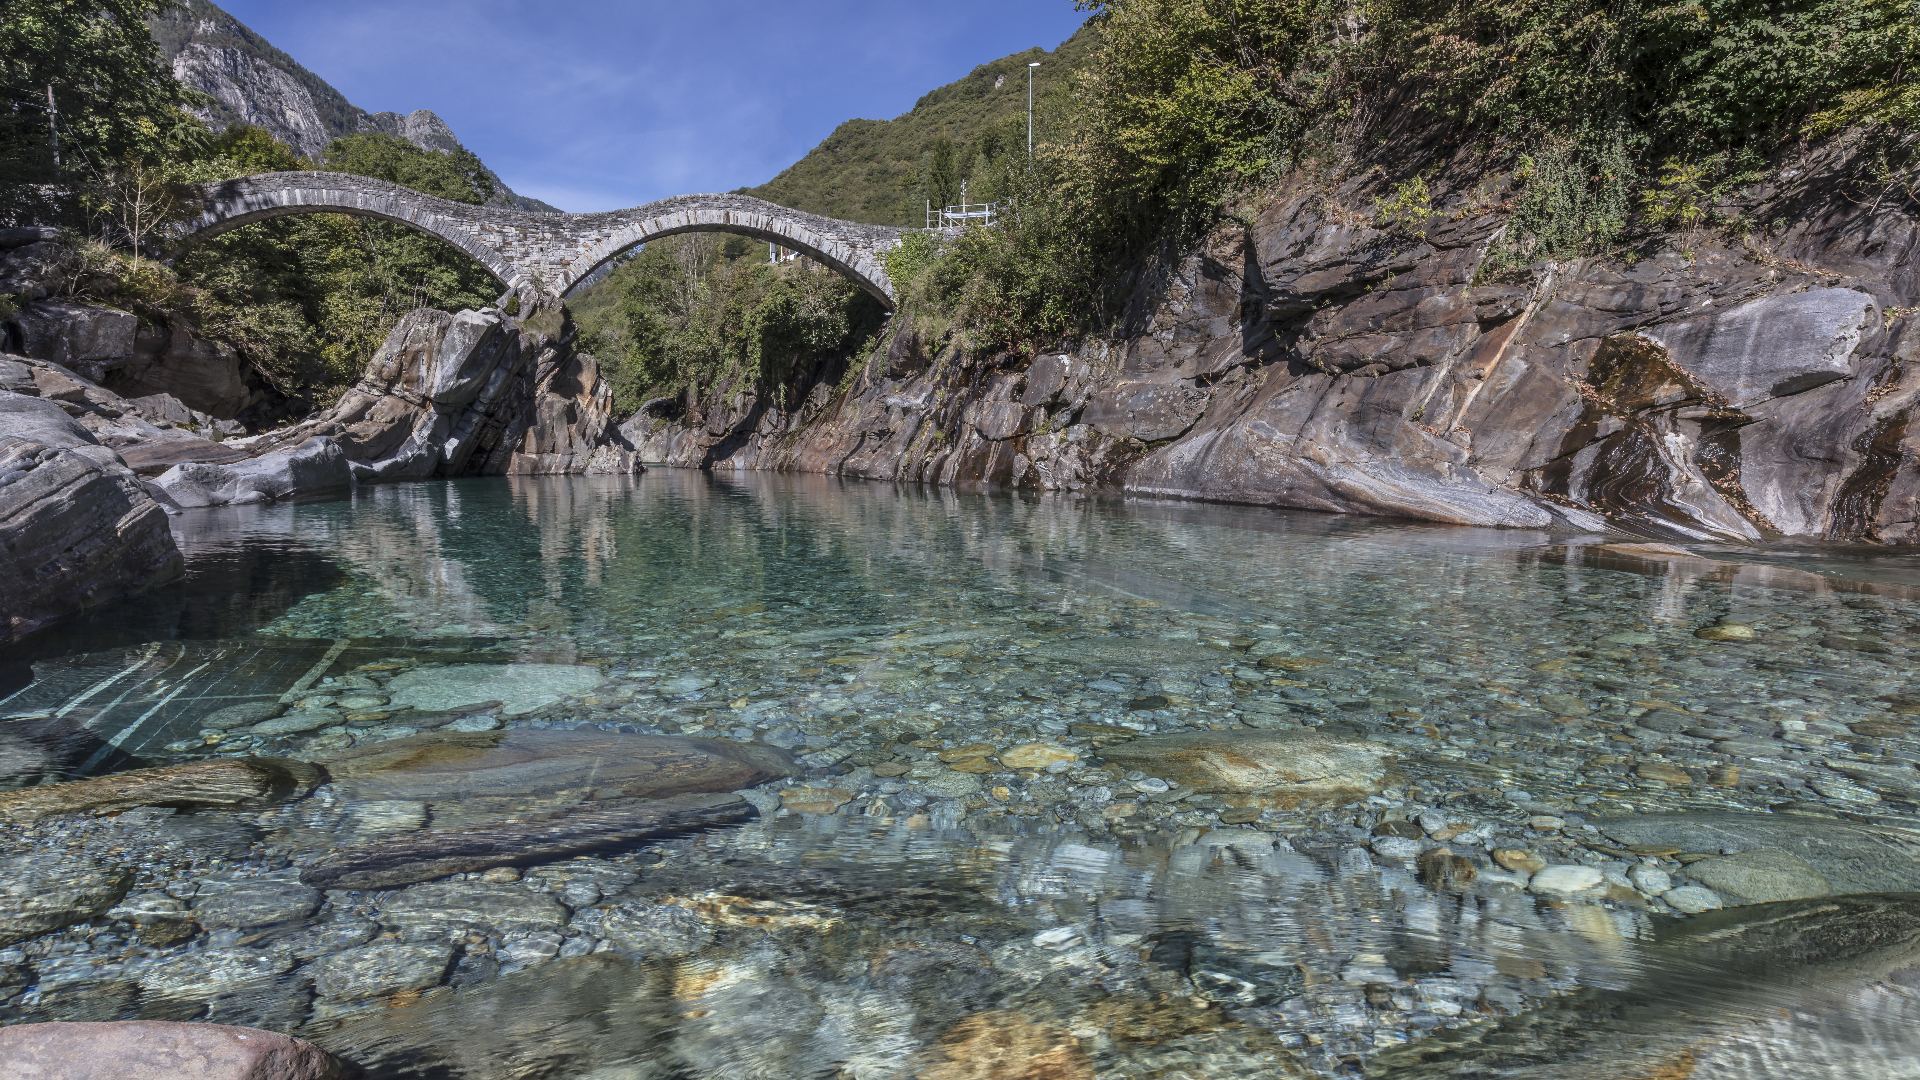 Up and down the Valle Verzasca